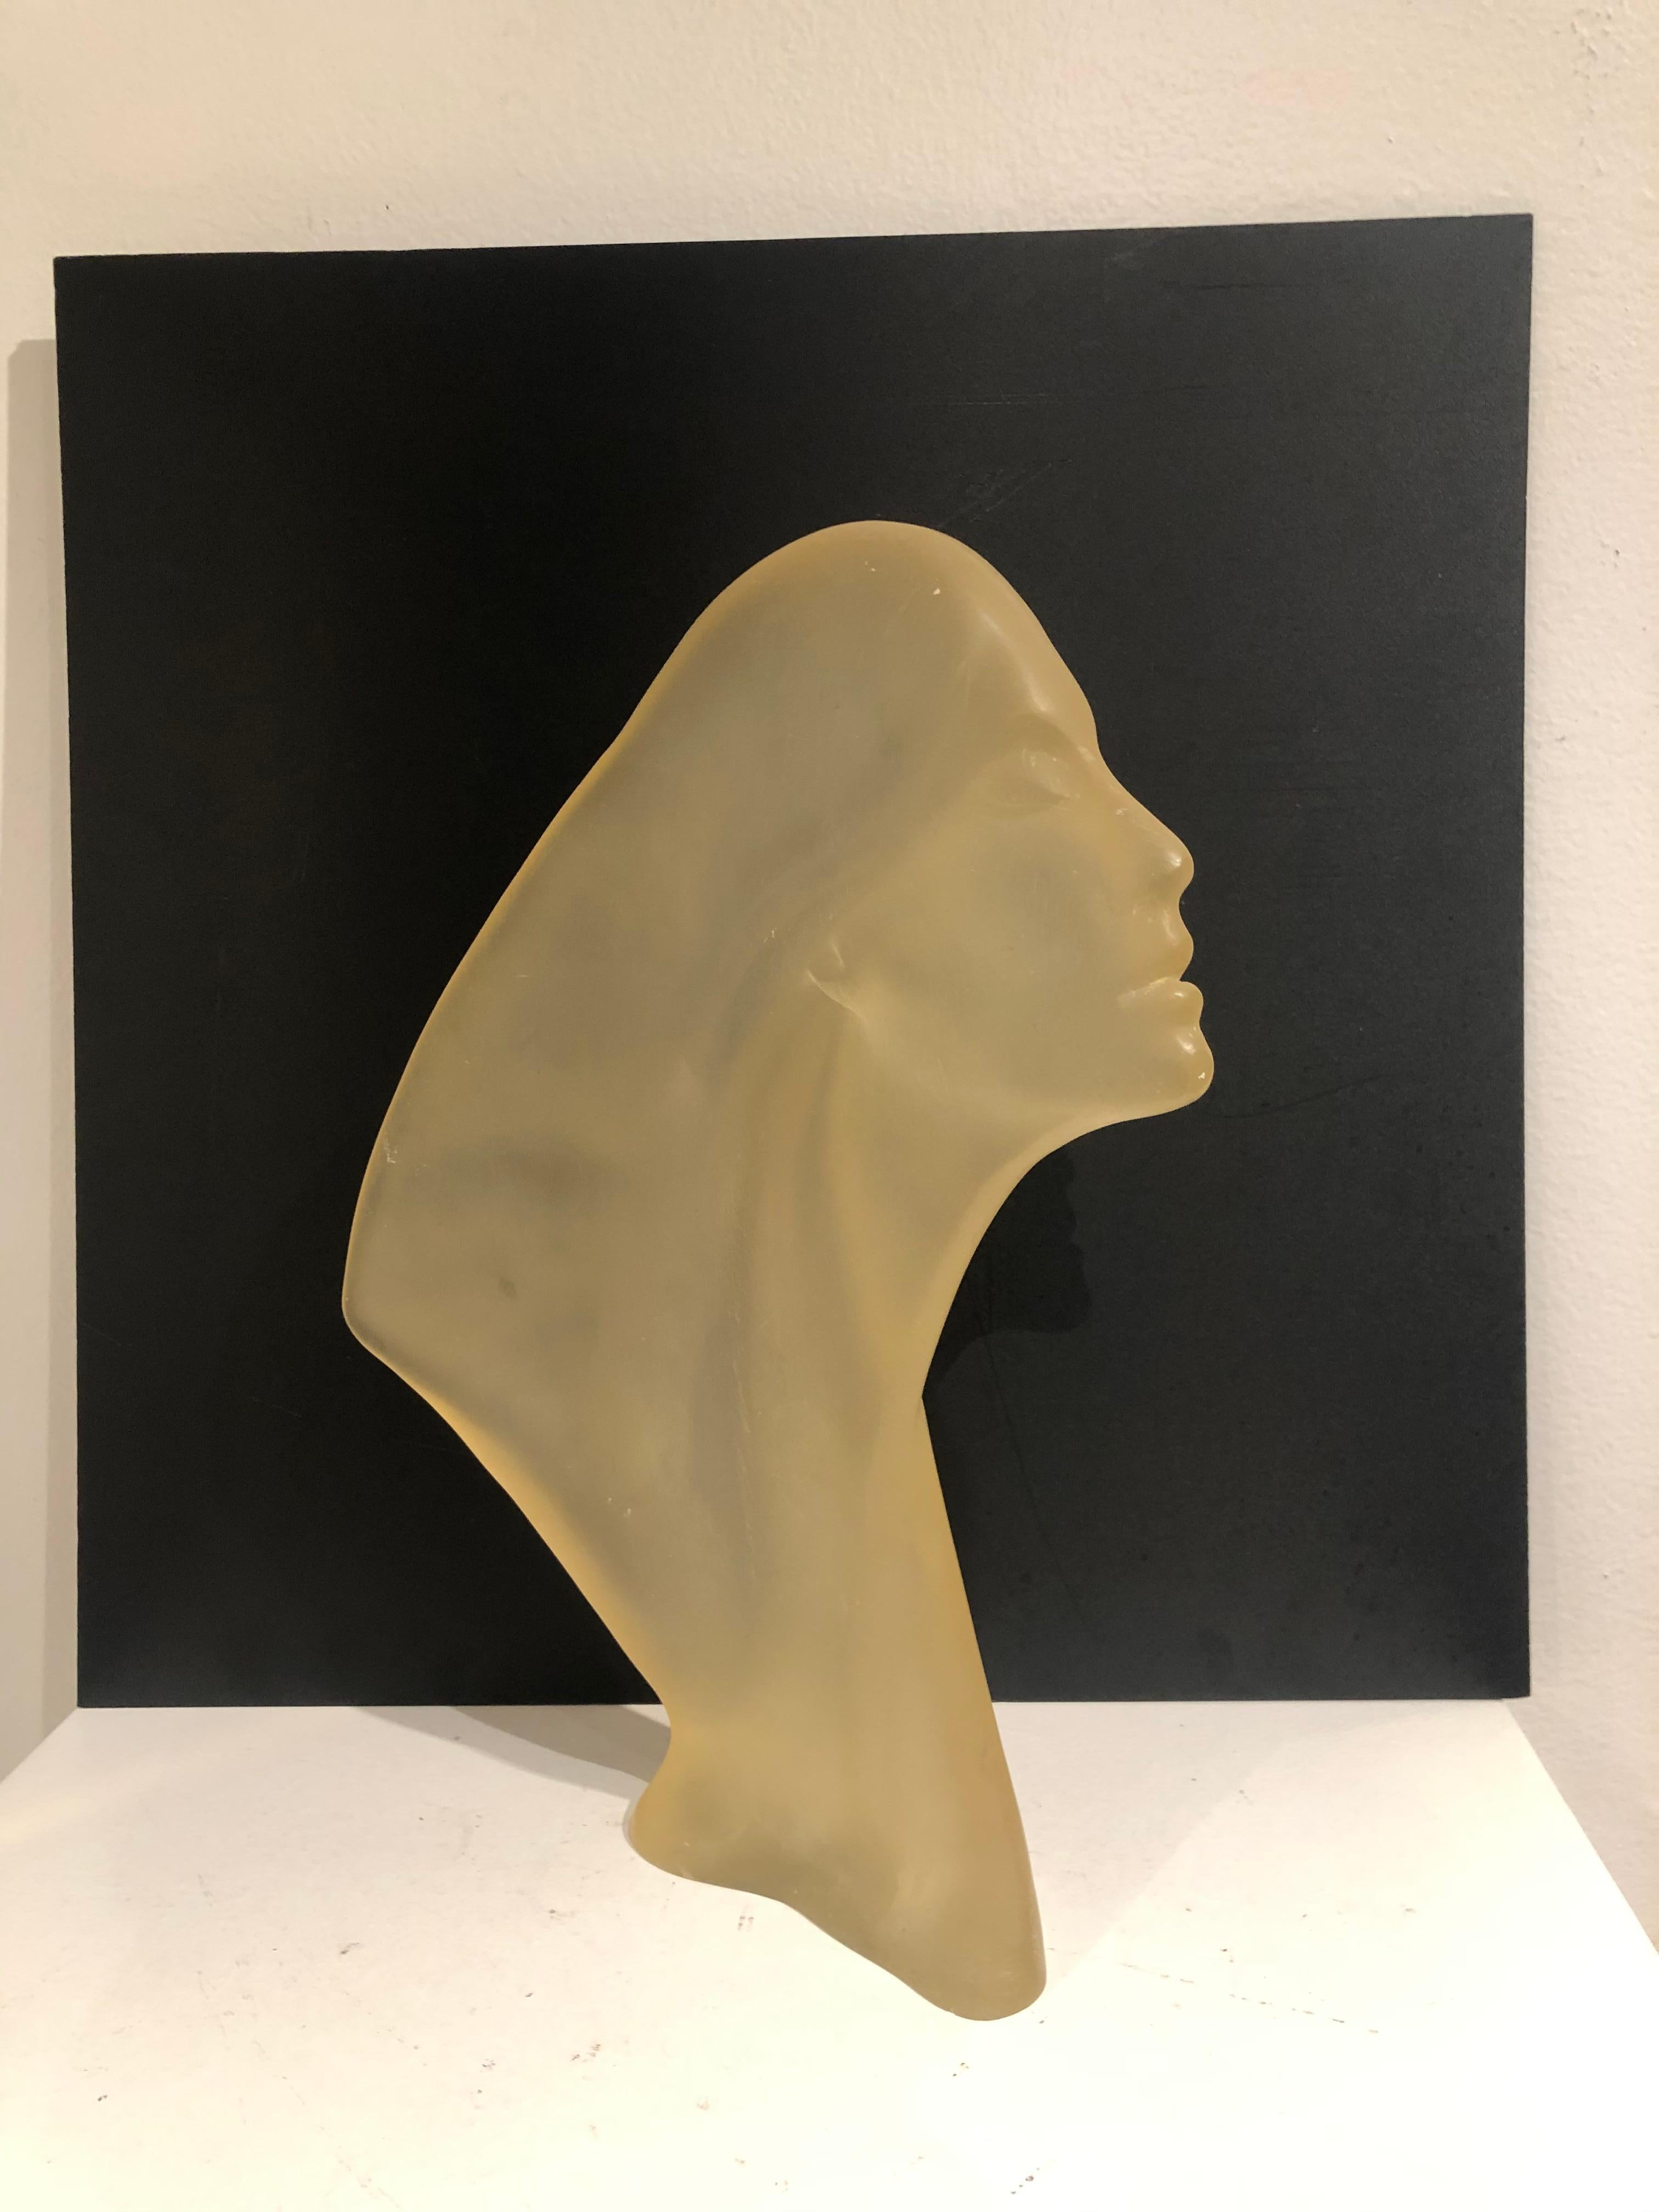 Beautiful Lucite sculpture by David Fisher in frosted finish, circa 1962 unsigned I believe it’s made by Austin Productions its heavy and well done piece.